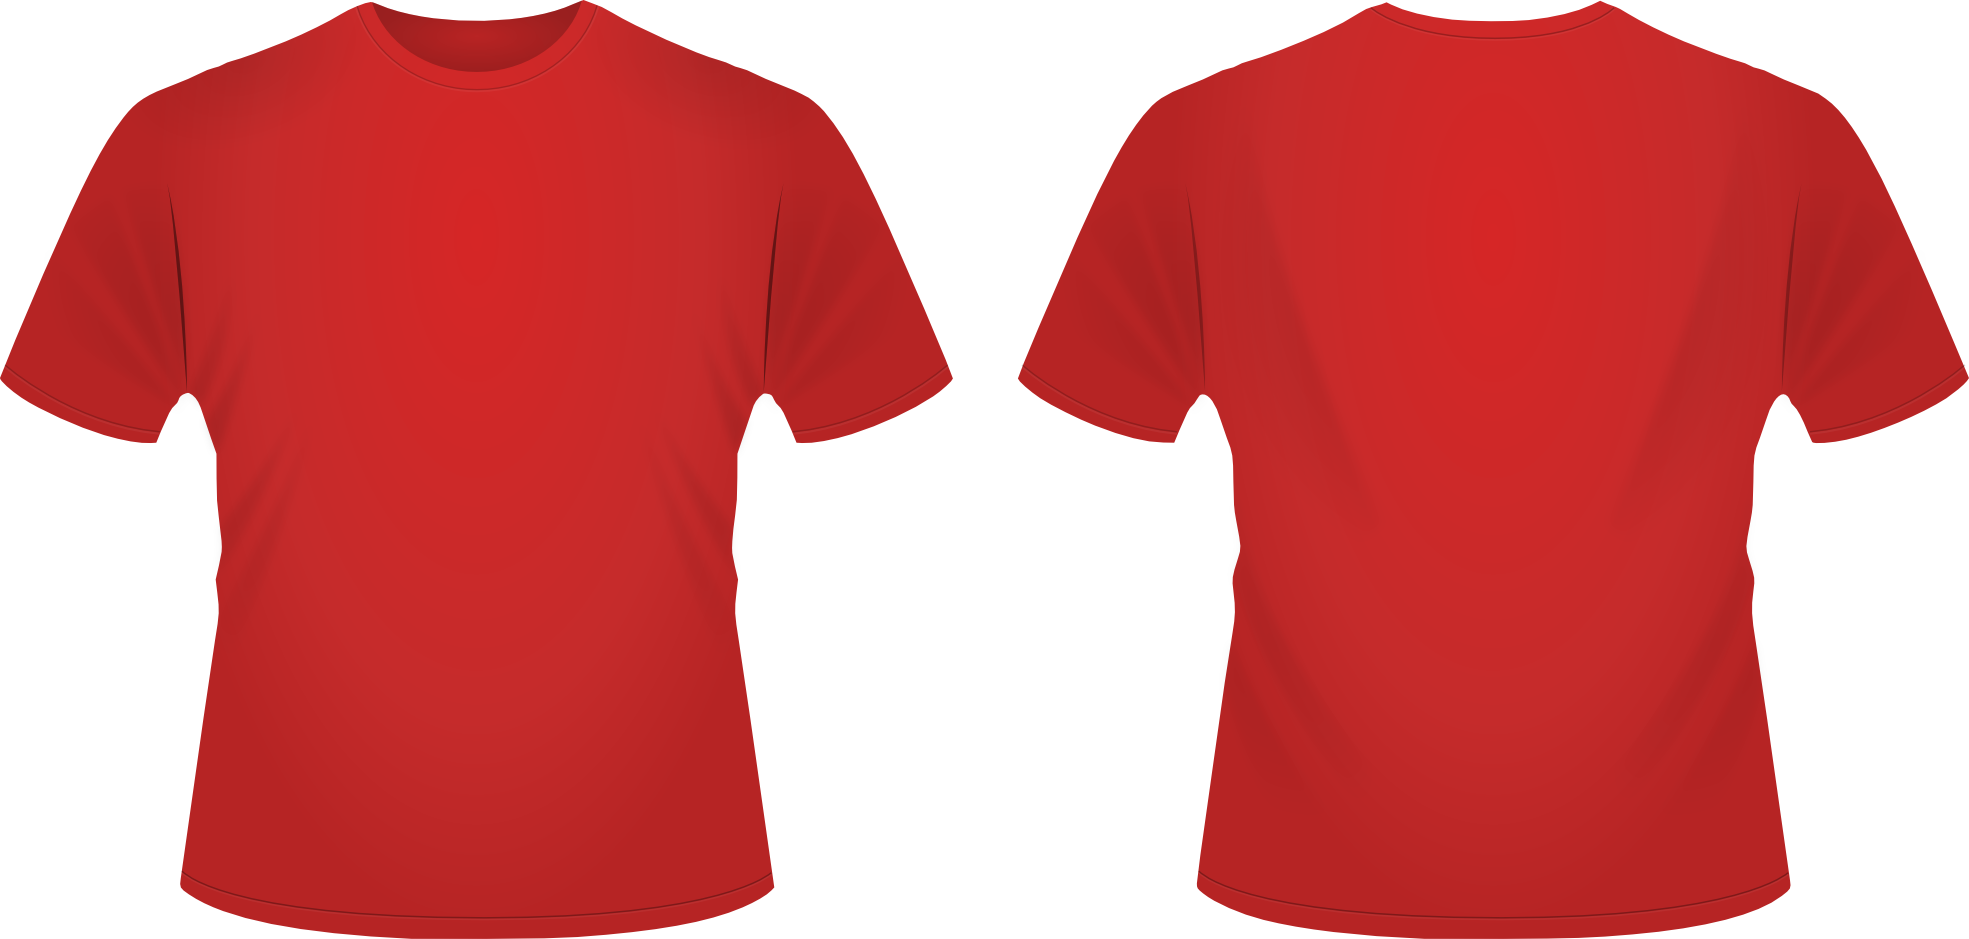 red kaos polos merah png clipart best #32541